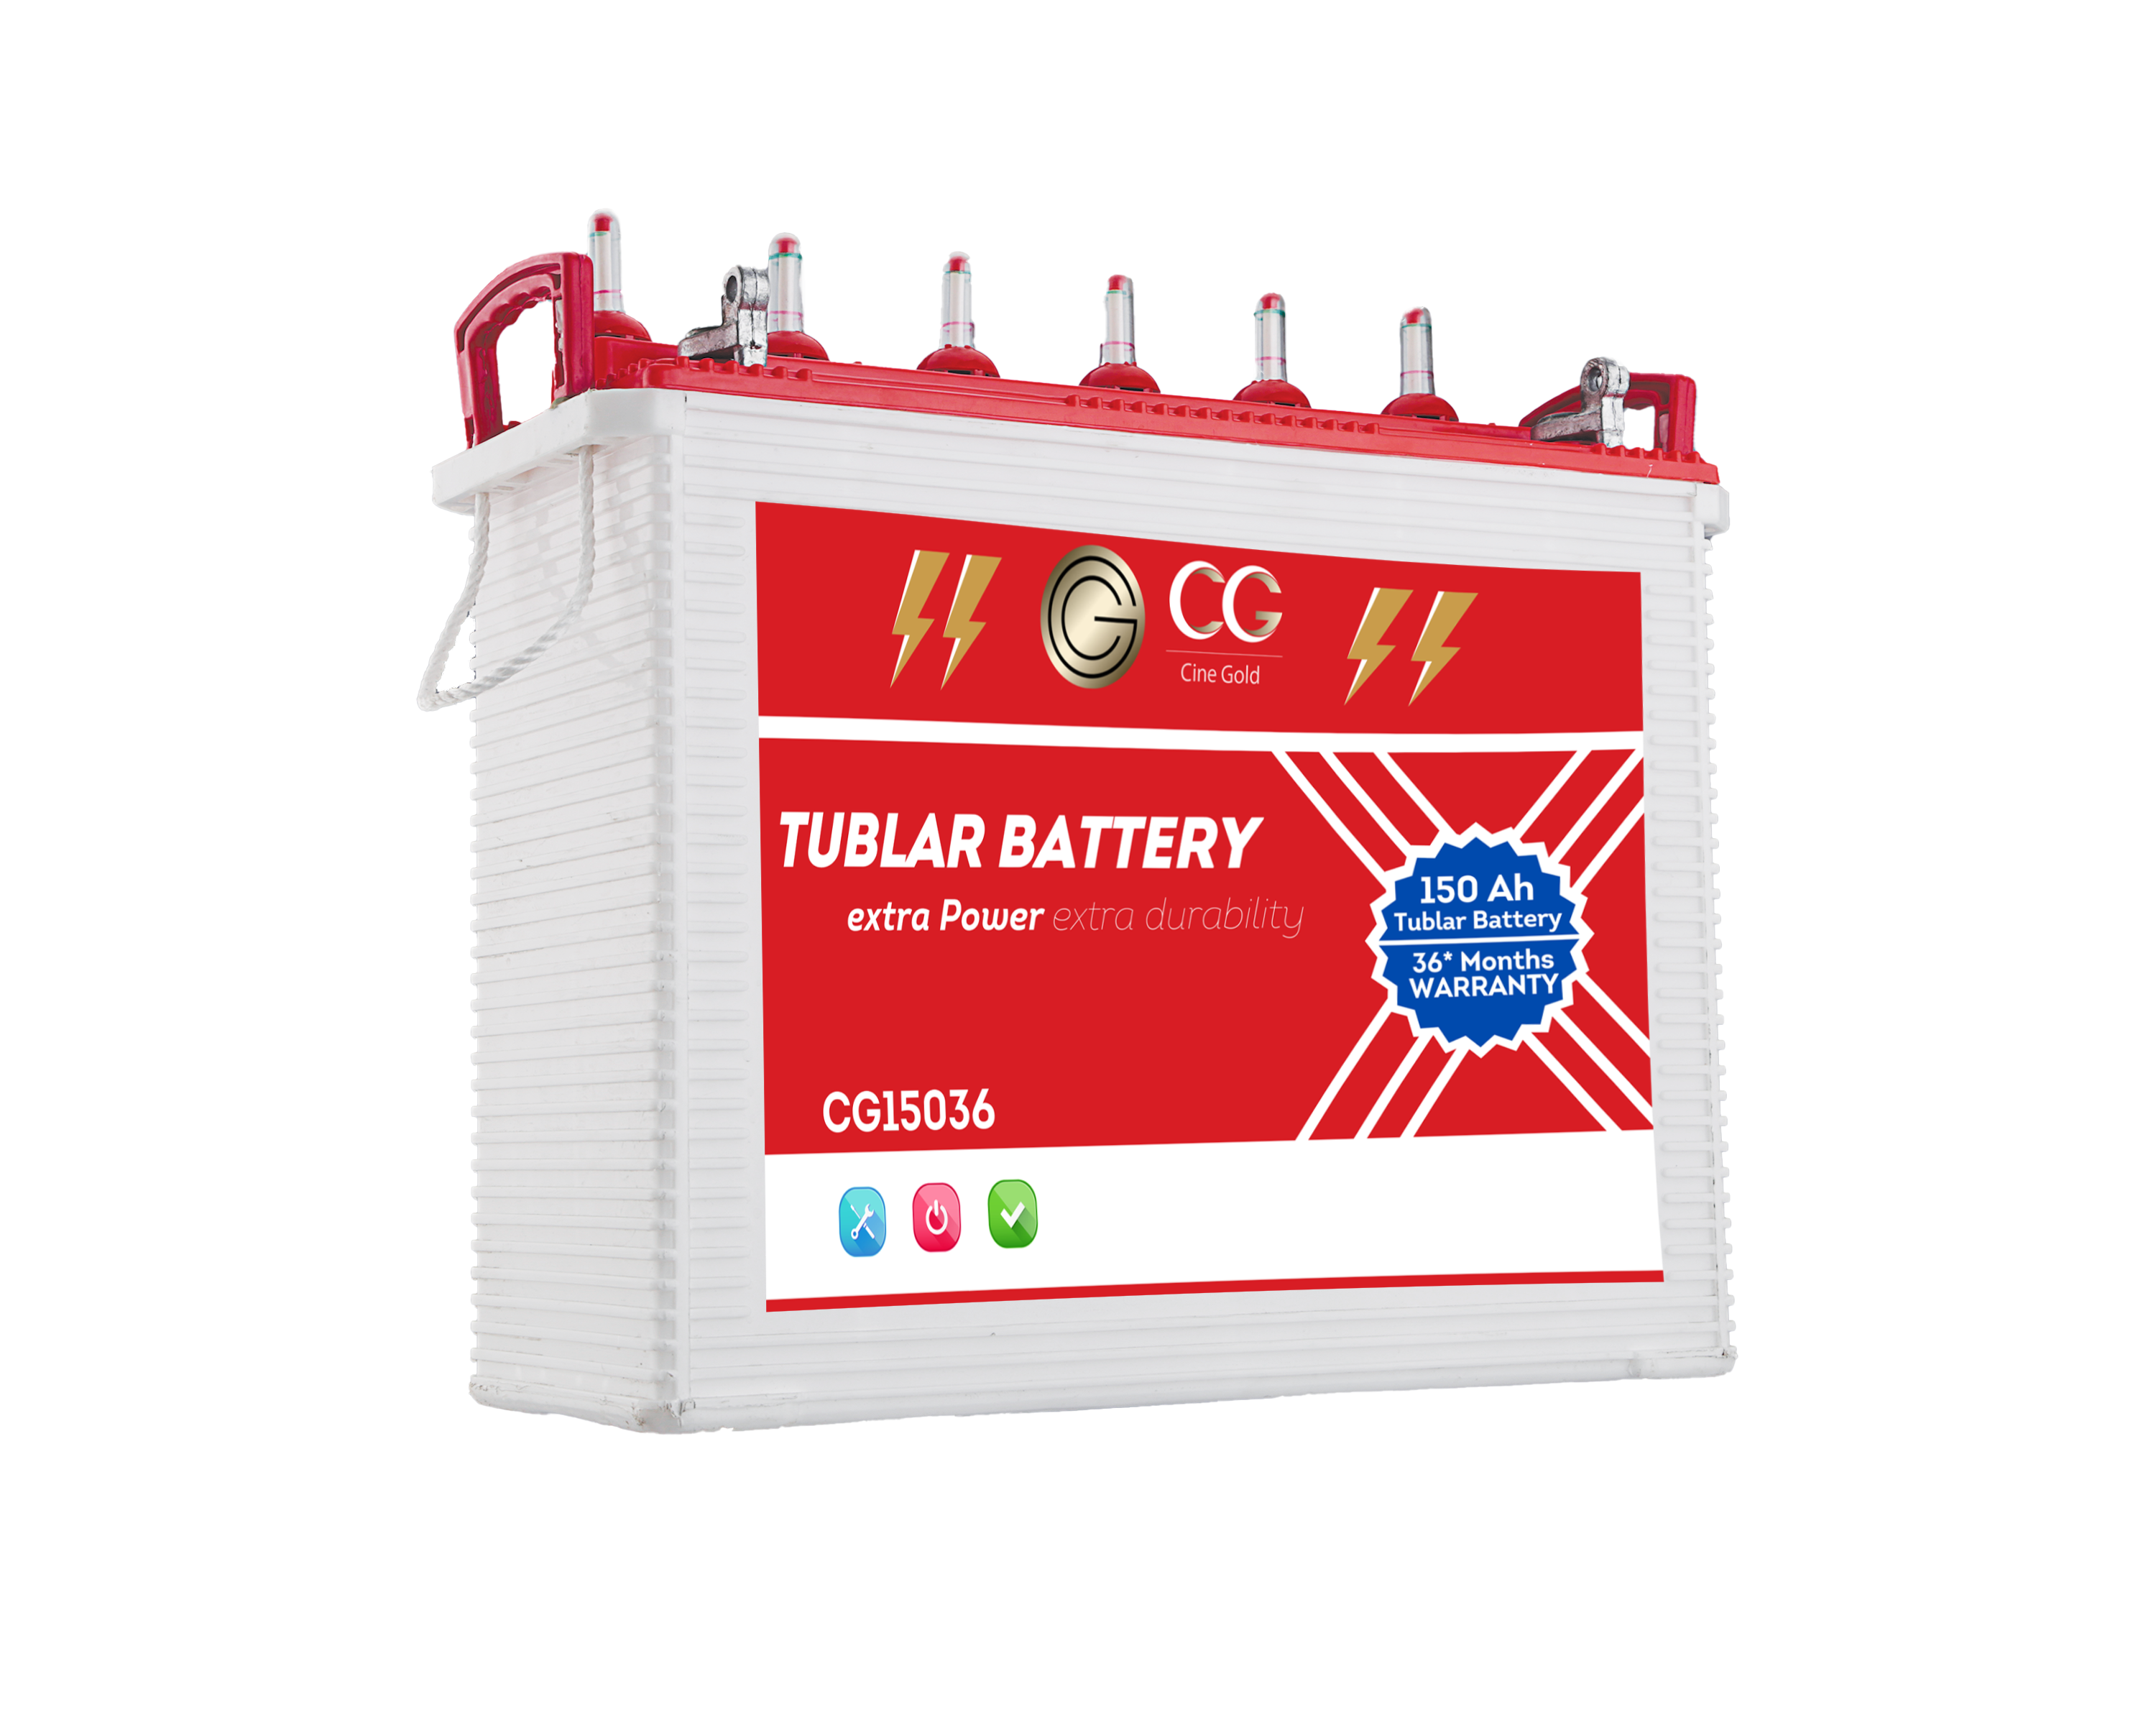 Cine Gold Inverter Battery 150 Ah - Reliable Backup for Homes and Offices with 36 Months Warranty